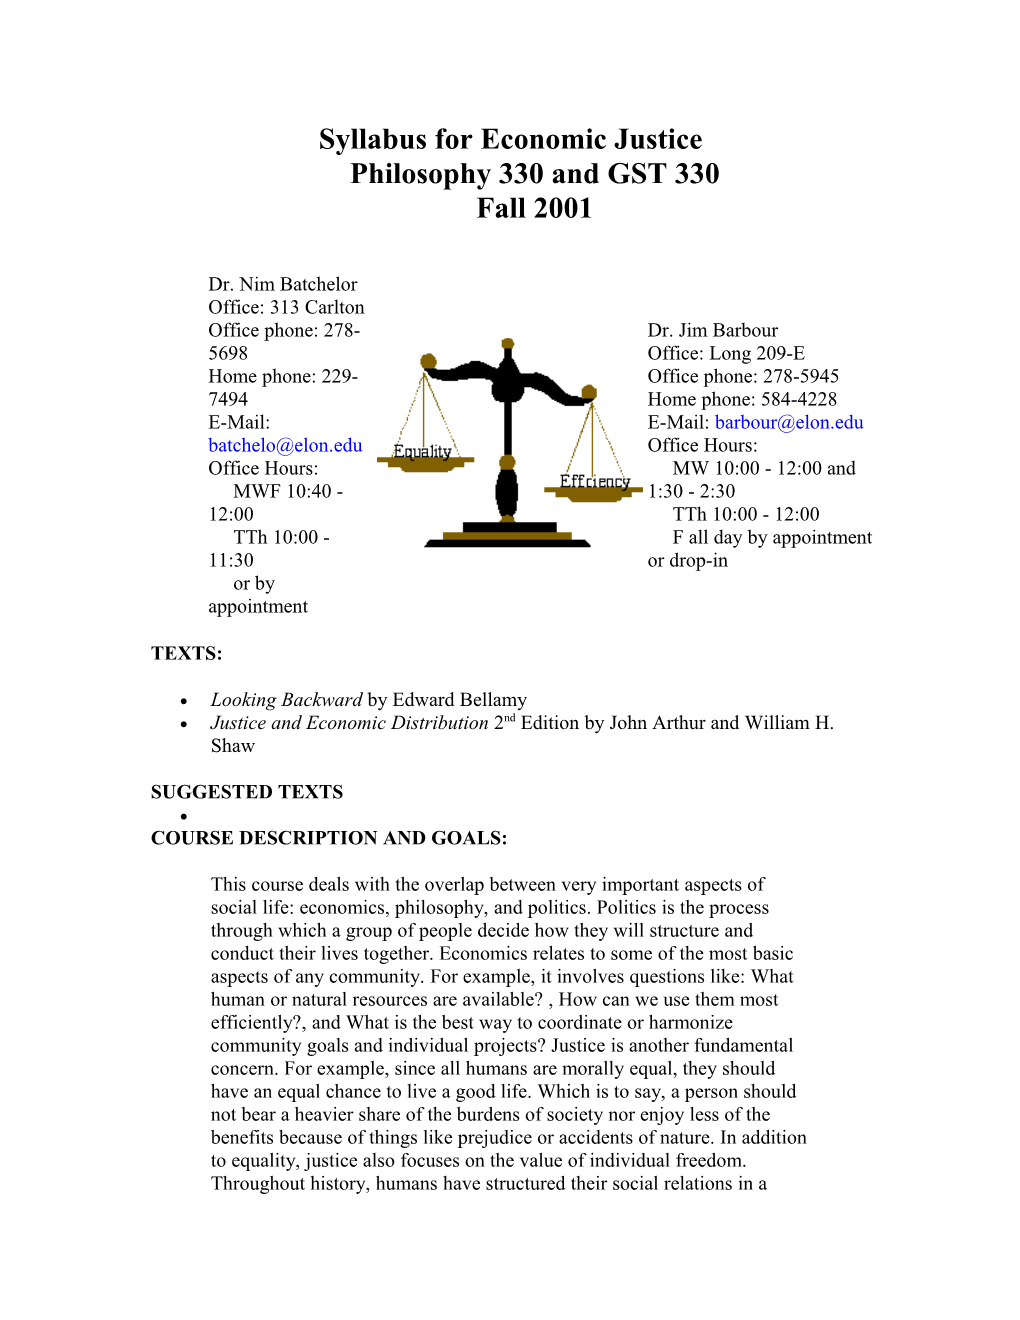 Syllabus for Economic Justice Fall 2001